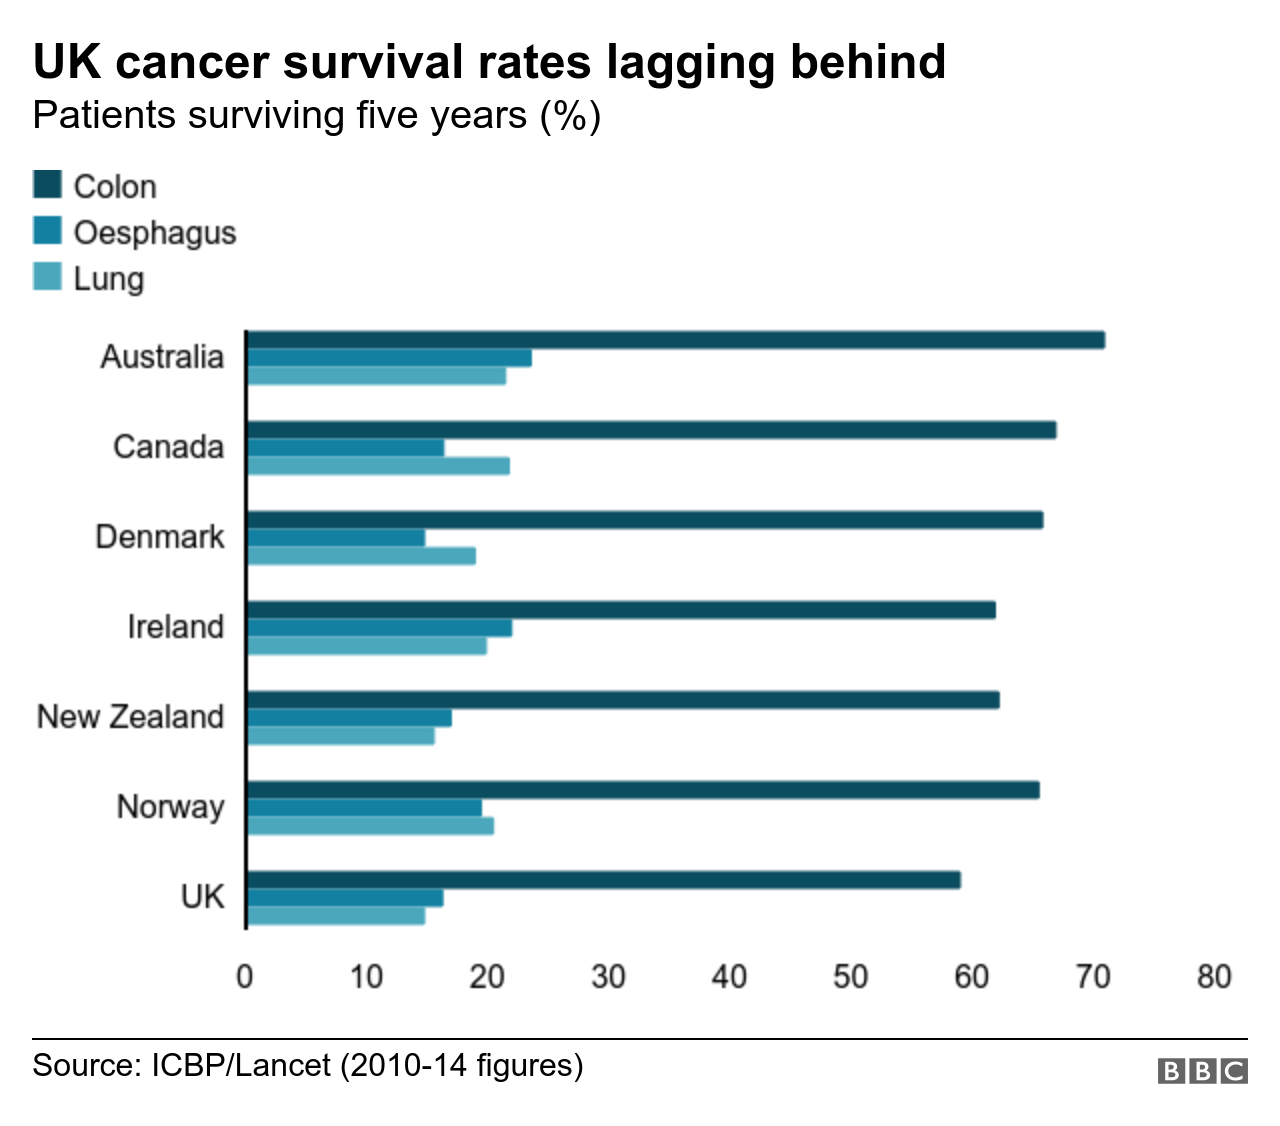 Cancer survival rates in UK compared to other countries